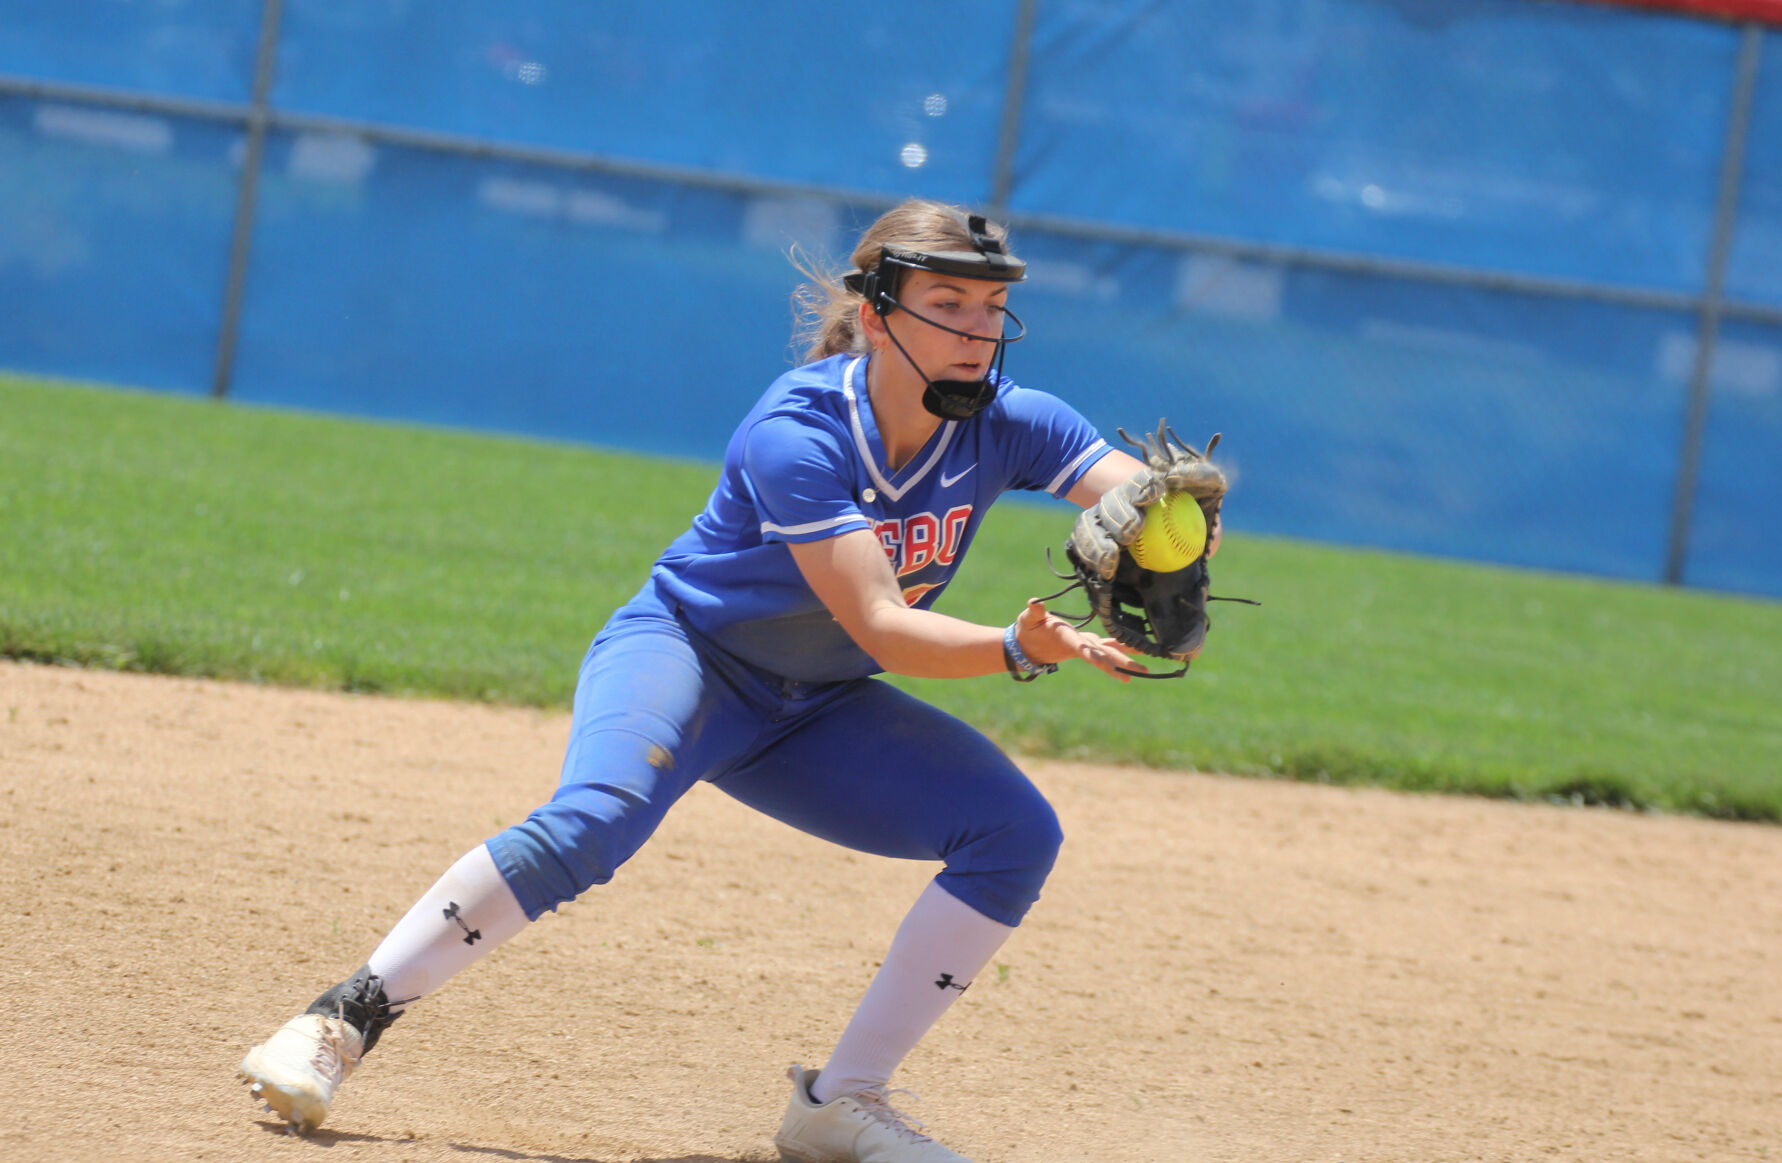 Western Boone softball splits games with Lawrence North, gearing up for sectional play